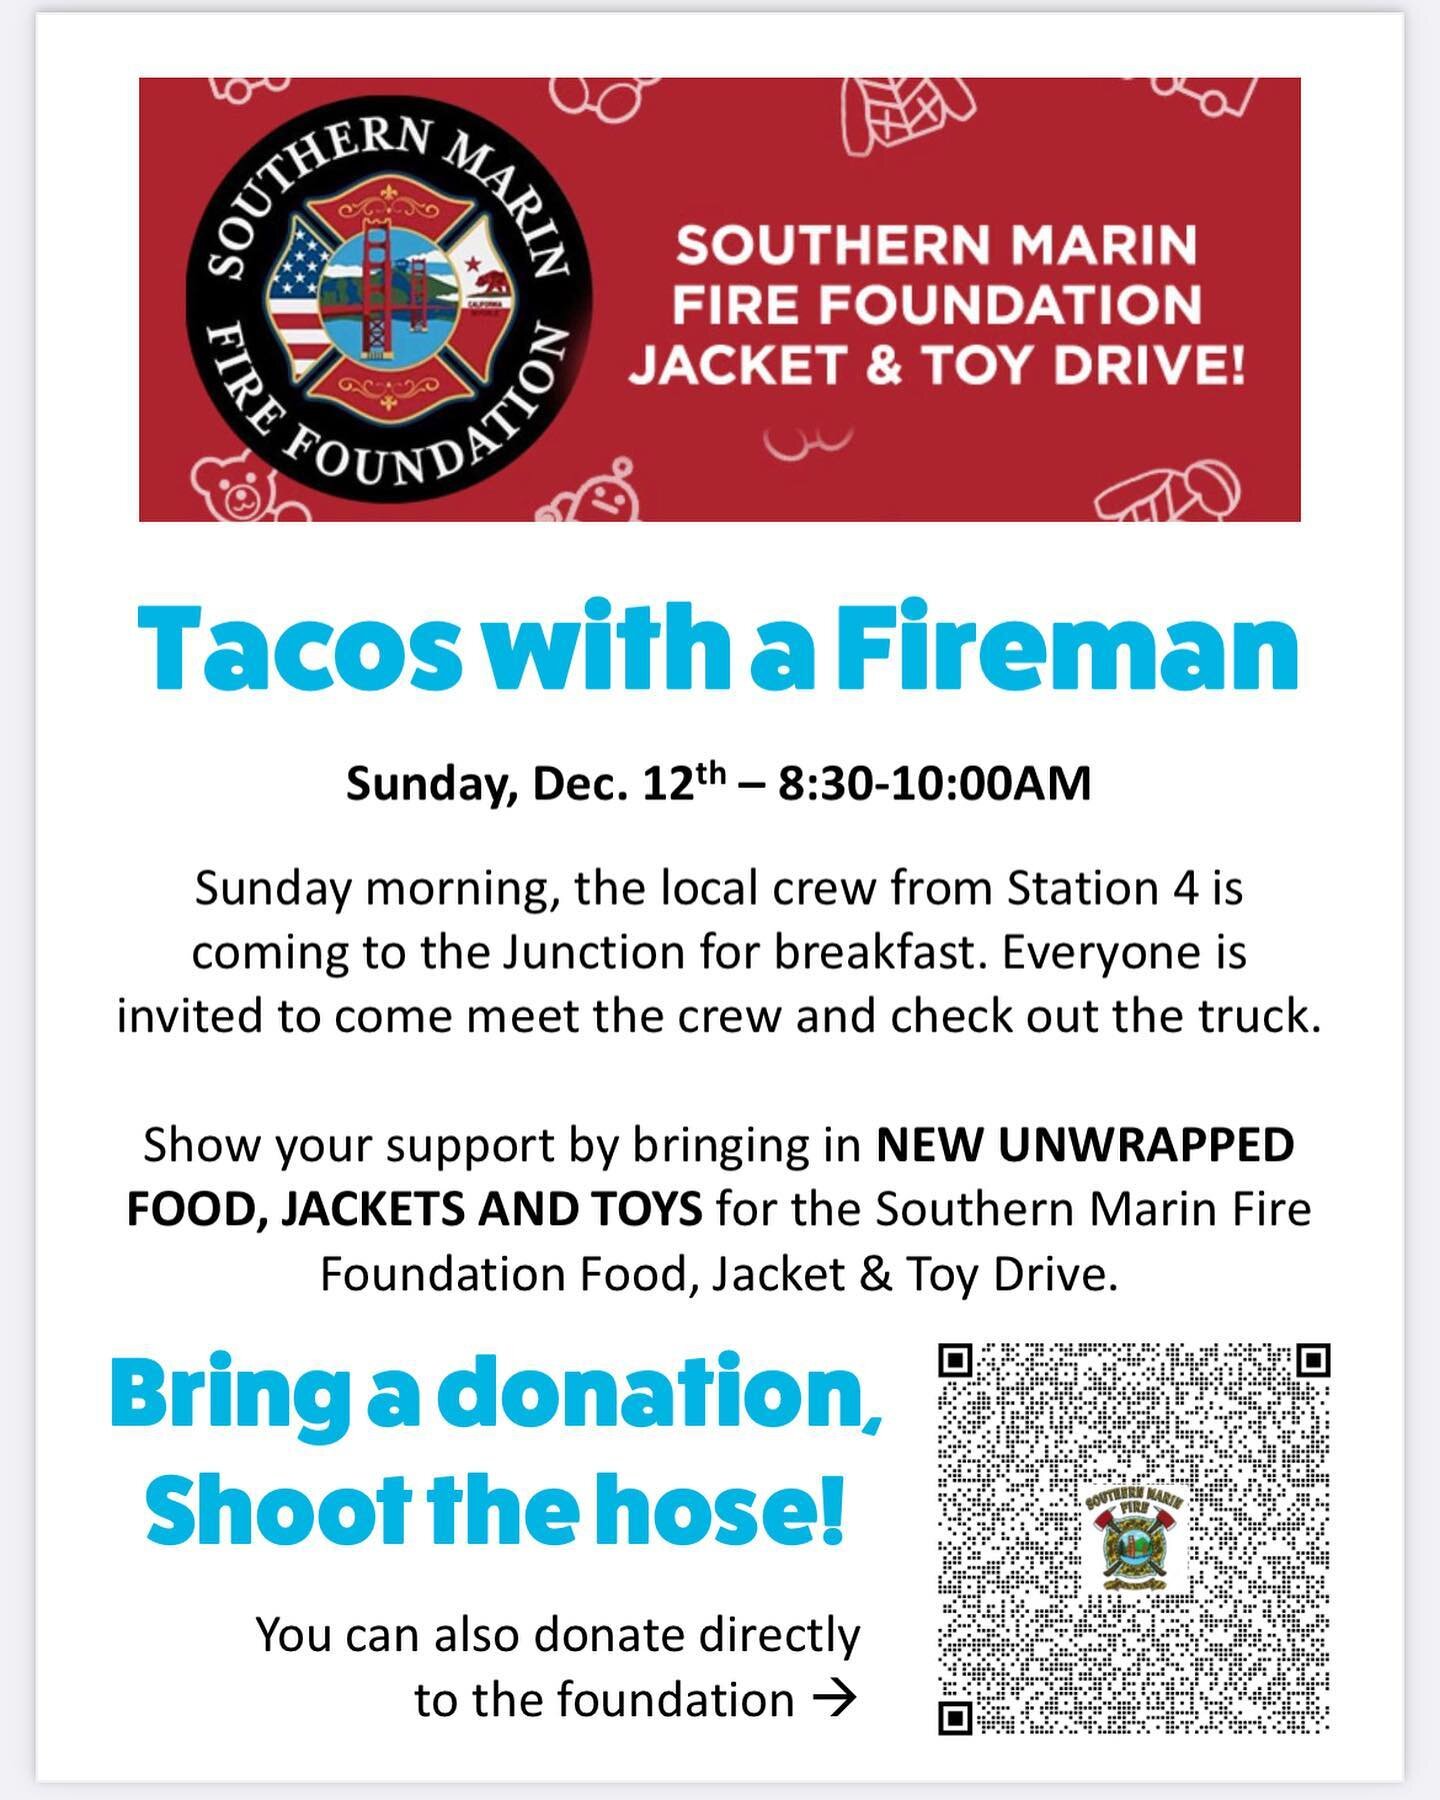 This was a ton of fun last time, don&rsquo;t miss it. Bring a donation, shoot the hose!

Eat Tacos with a Fireman
Sunday Dec 12th - 8:30-10:00am